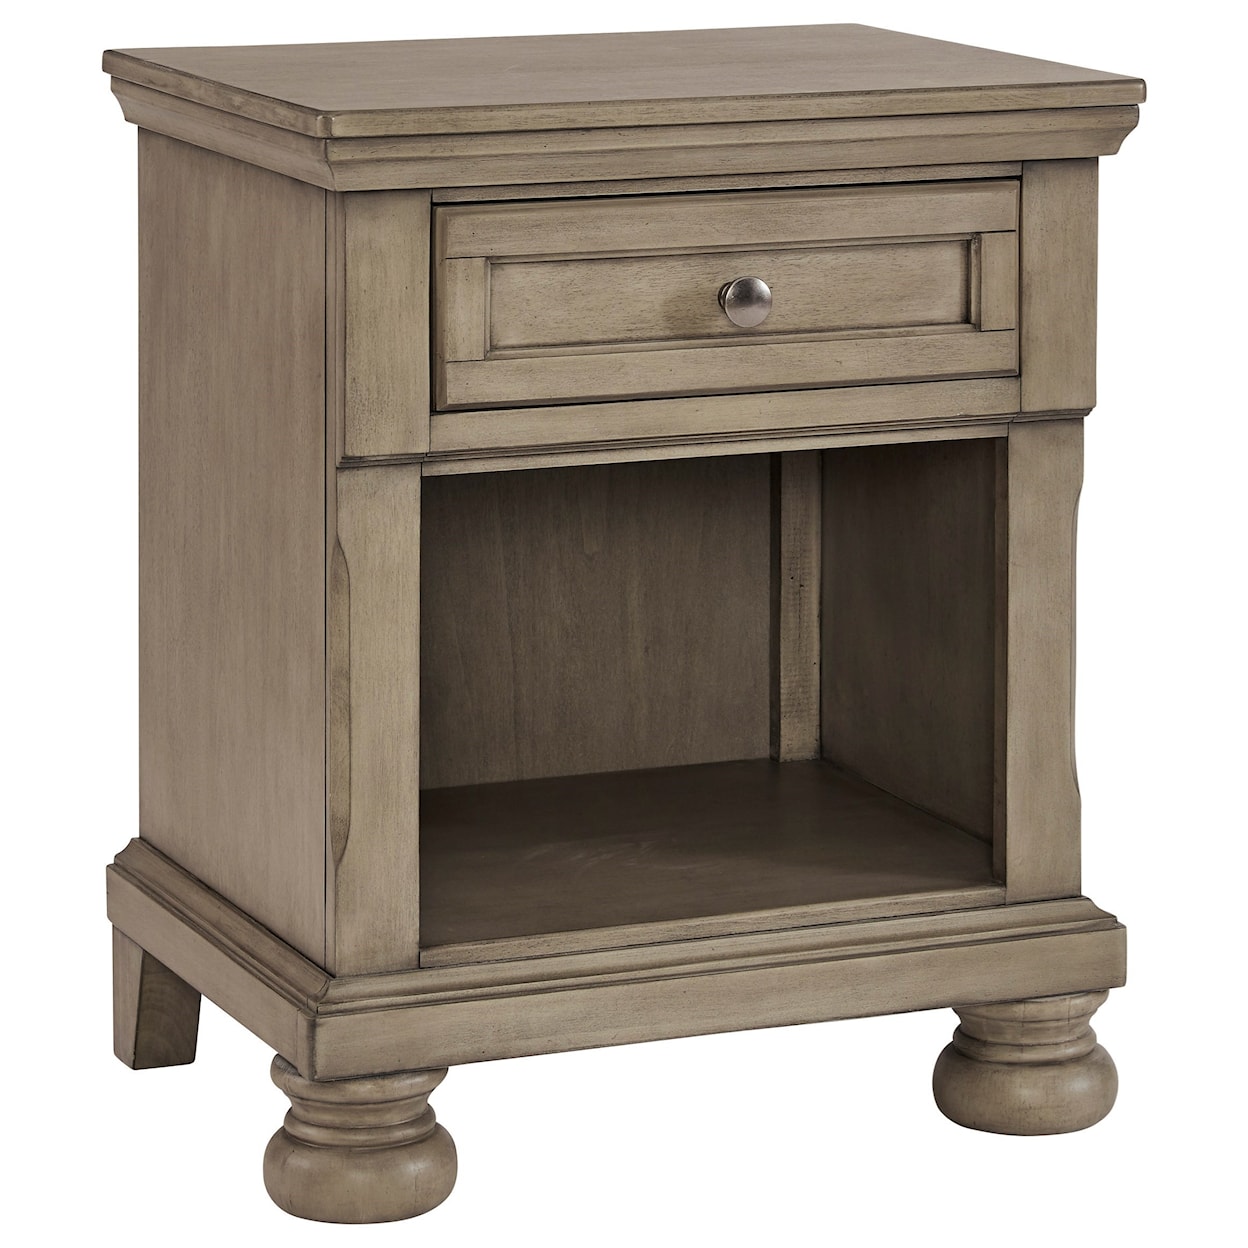 Signature Design by Ashley Lettner 1-Drawer Nightstand